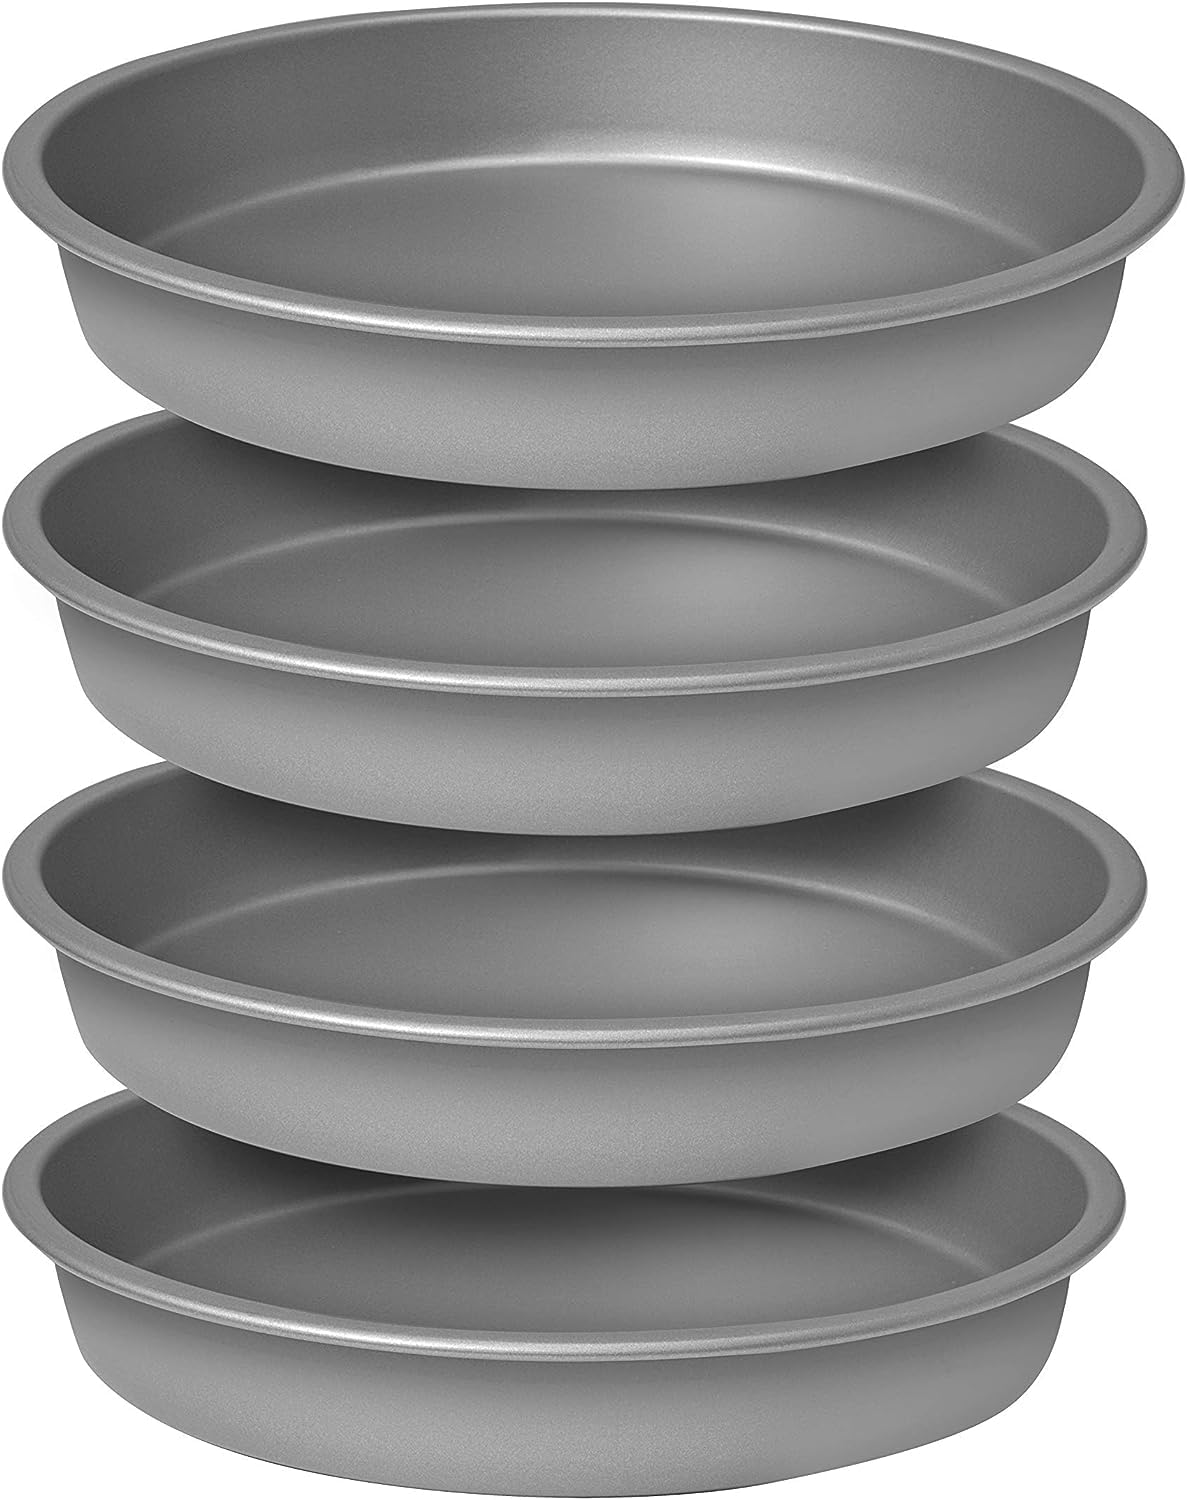 G & S Metal Products Company Baker Eze Nonstick 9-Inch Round Cake Pans, Set of 4